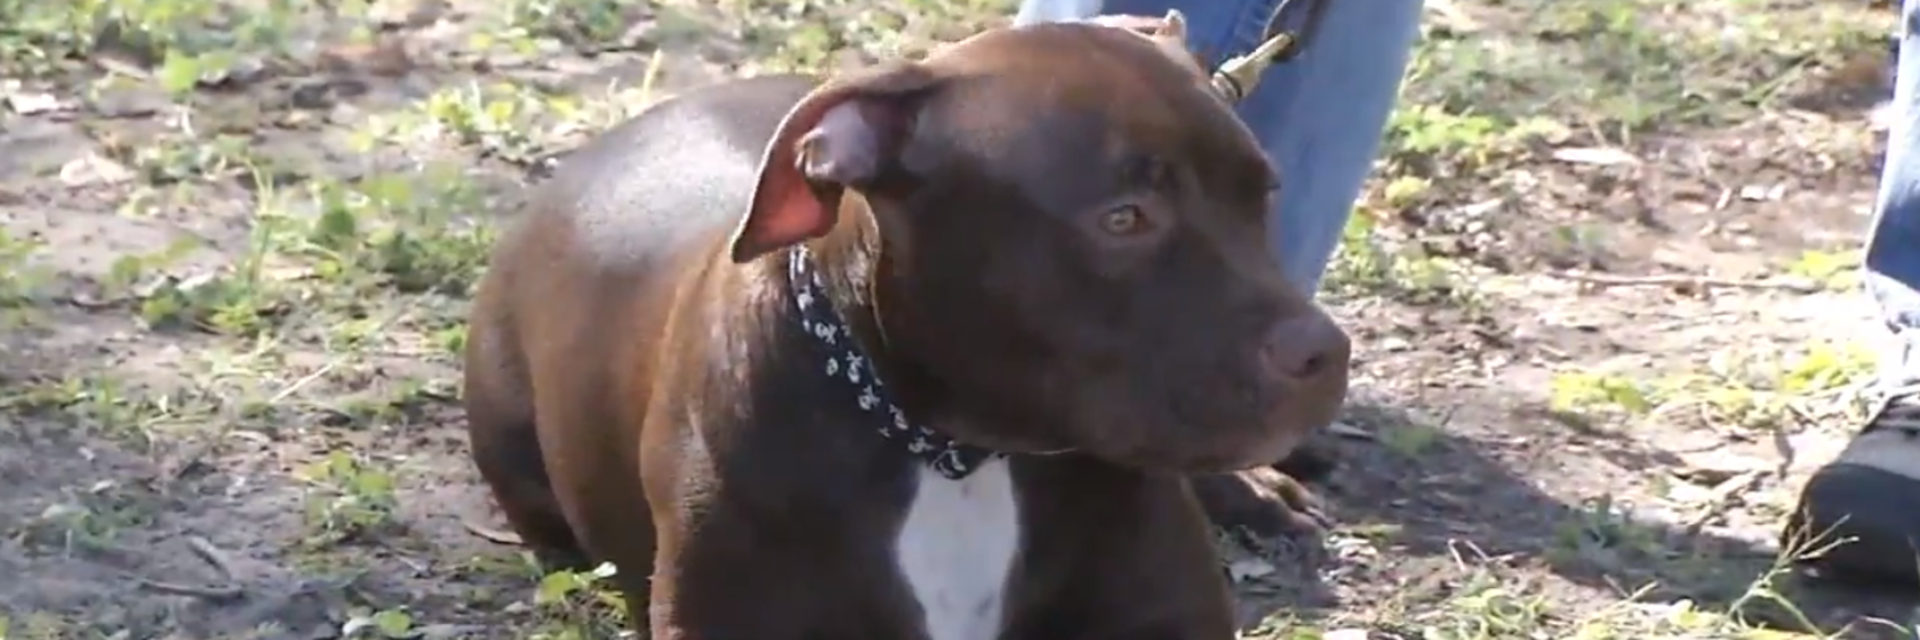 Denver Pit Bull Ban, in Place 30 Years, Could Be Lifted - The New